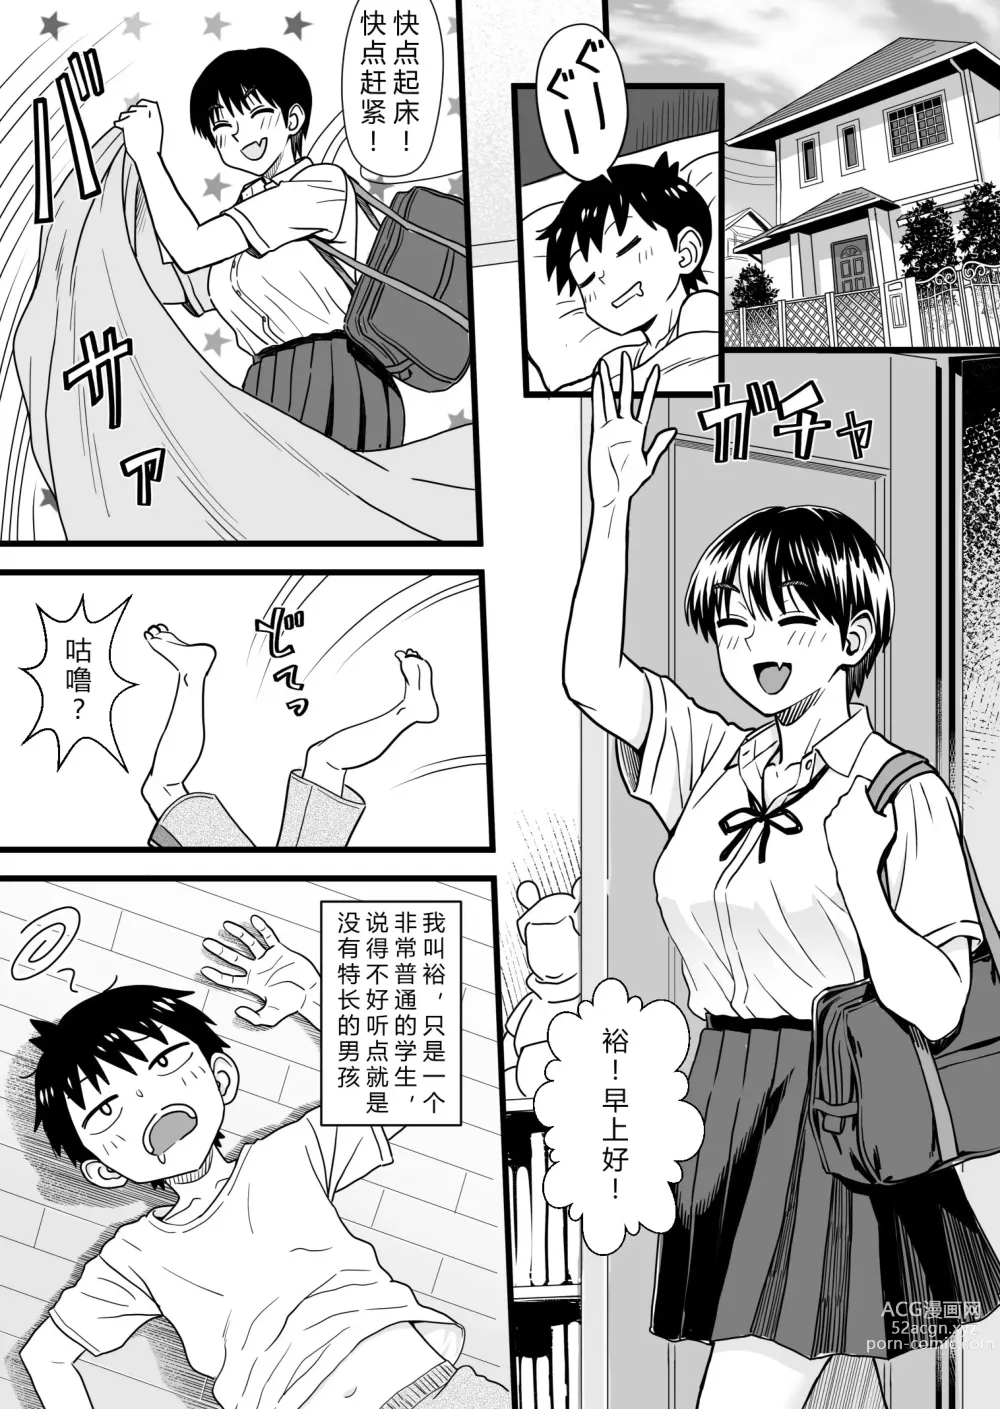 Page 4 of doujinshi How will the Protagonist's Brain be destroyed?